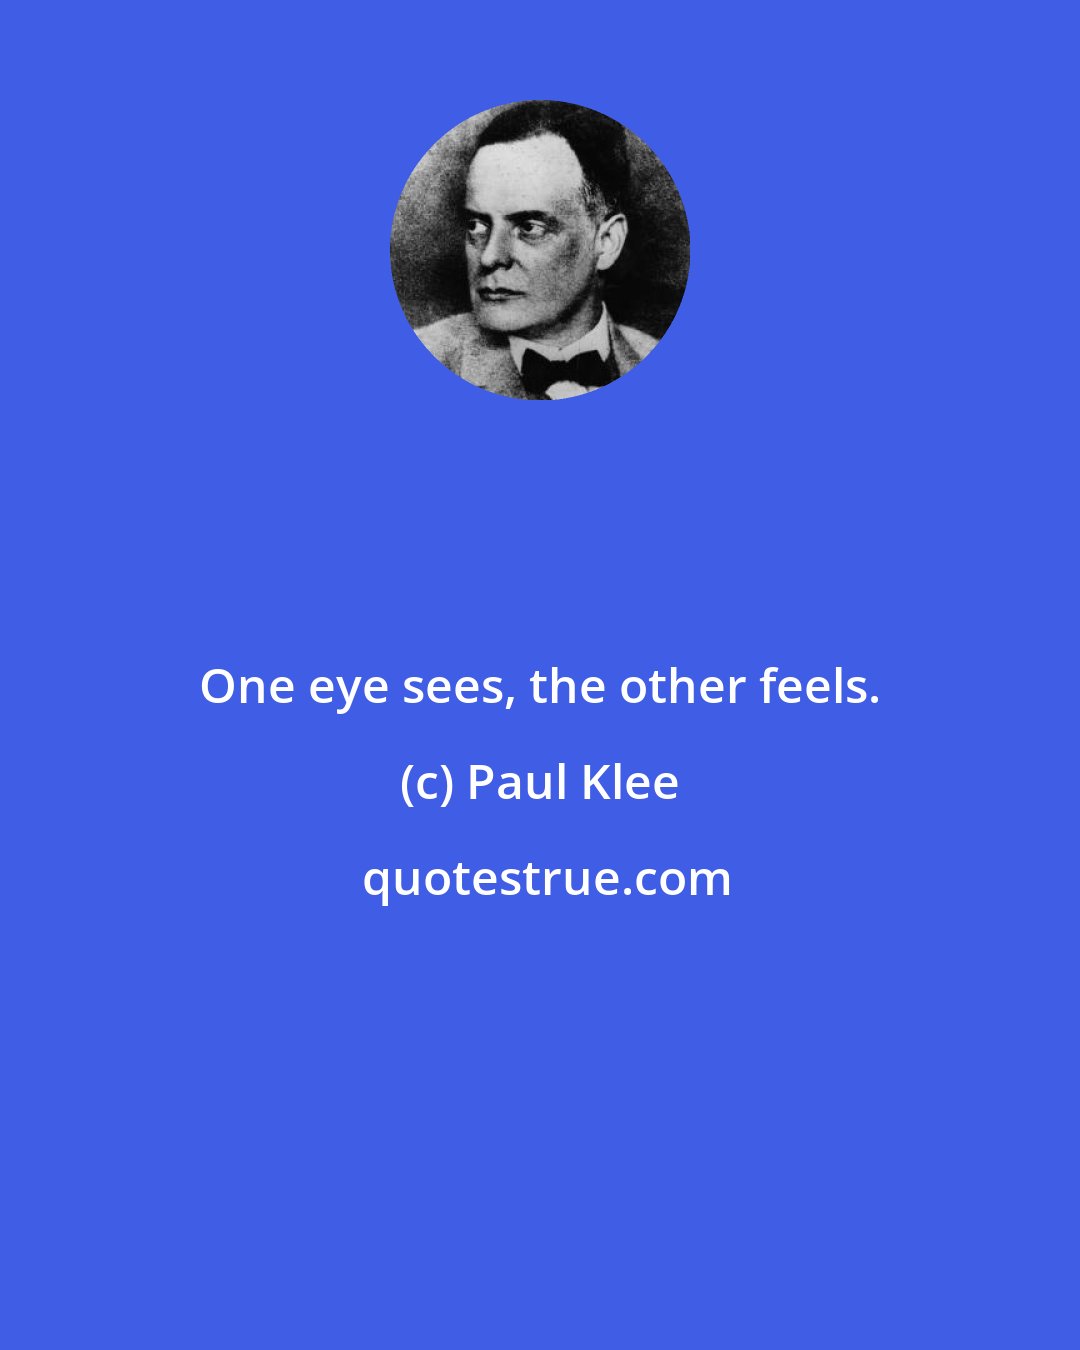 Paul Klee: One eye sees, the other feels.